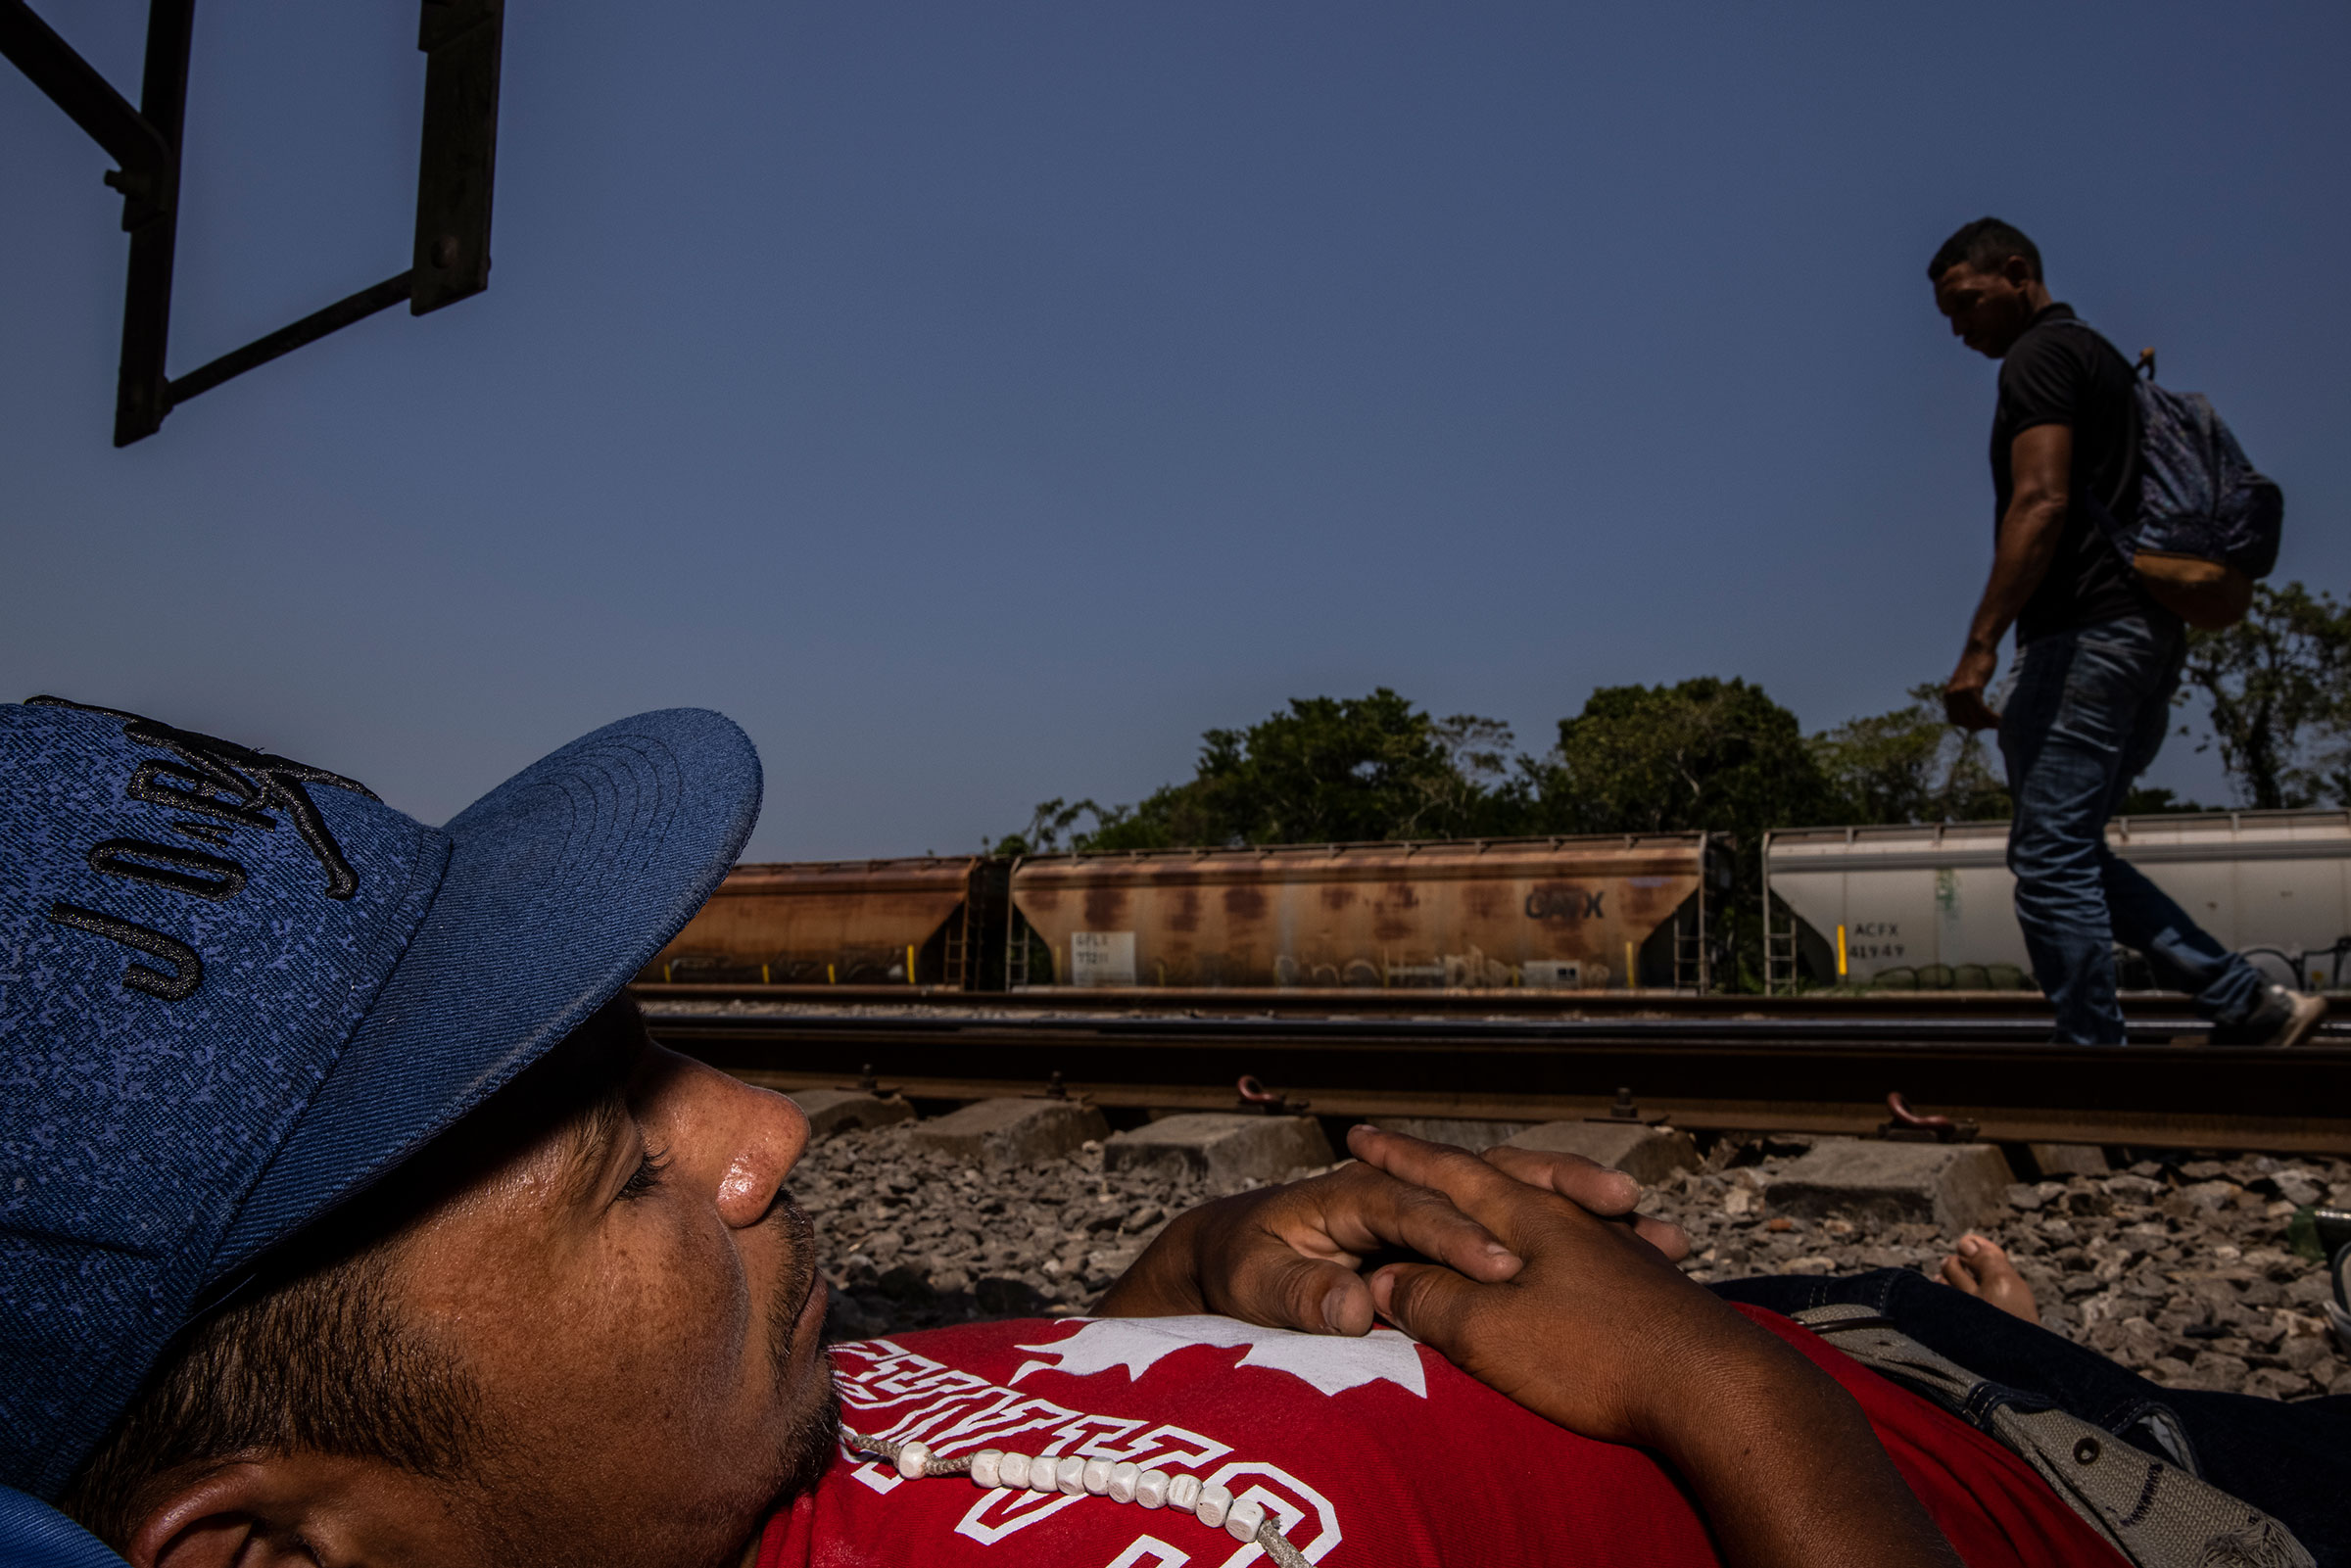 Jesus Antonio Carrillo Mendoza, 28, takes a nap in Higueras in the Mexican state of Veracruz, on March 23 near cargo trains used by <a href="https://time.com/6094276/us-migration-journey-stories/">migrants to travel northward through Mexico</a>. (Yael Martinez—Magnum Photos for TIME)